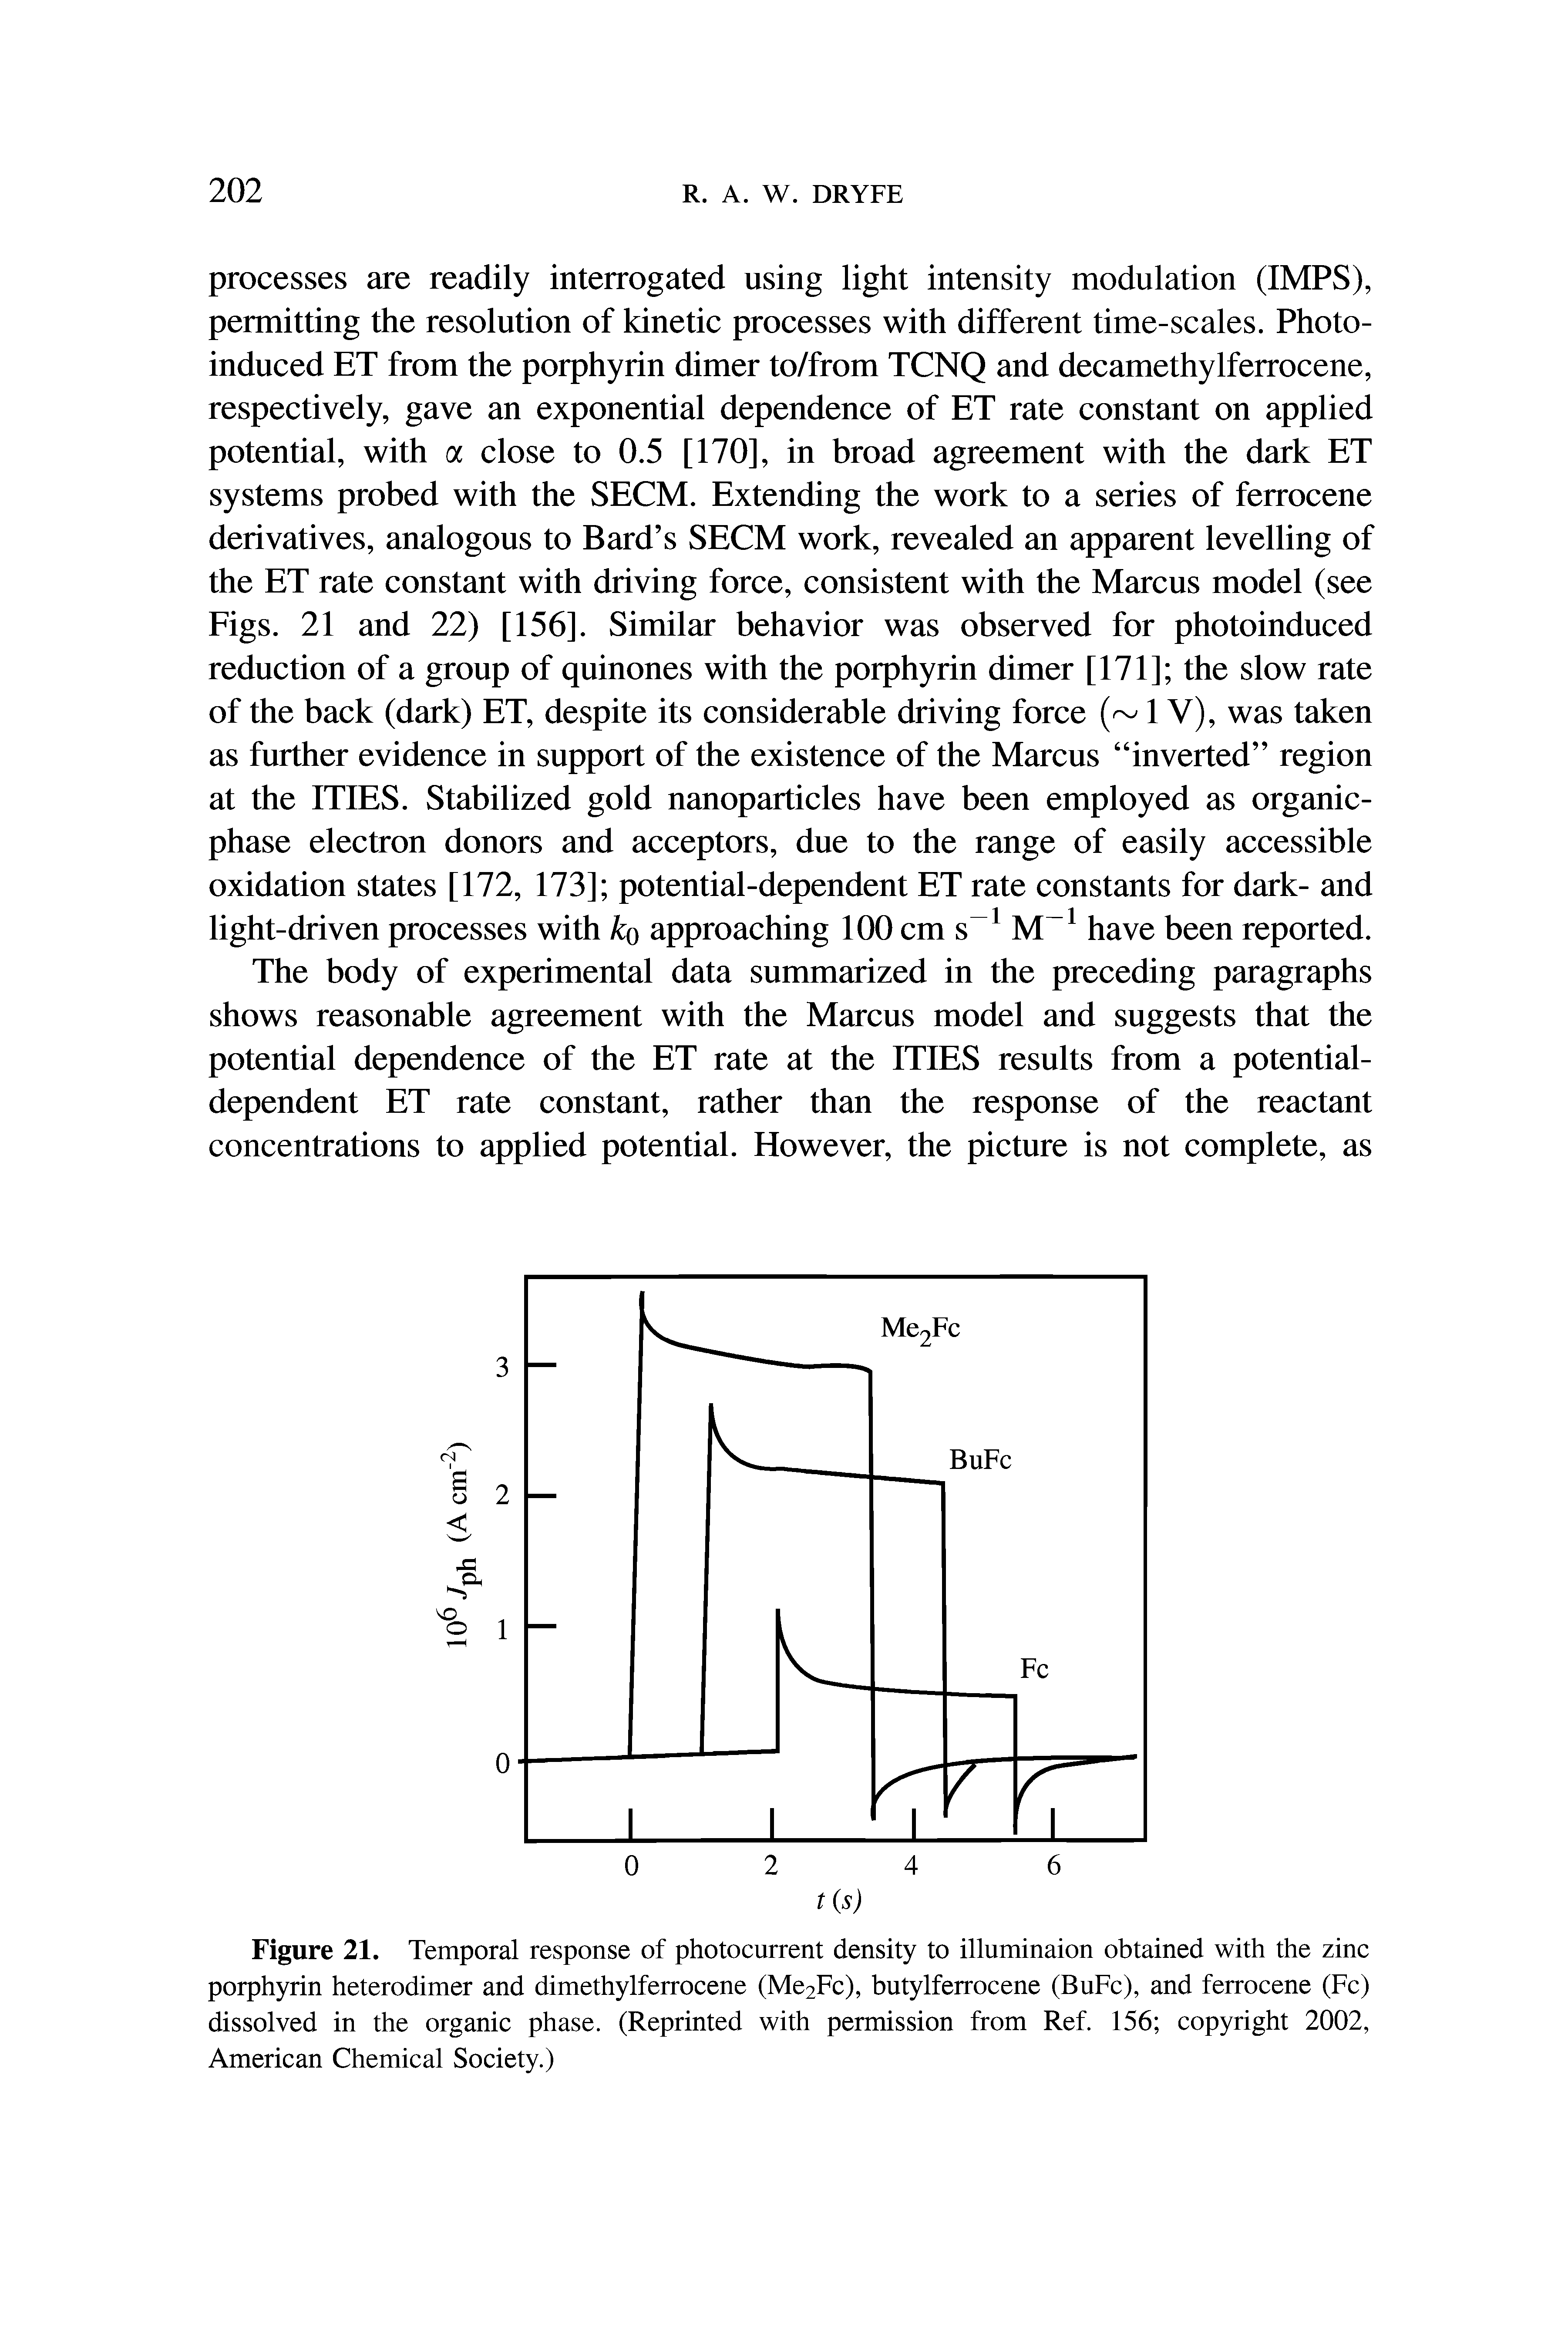 Figure 21. Temporal response of photocurrent density to illuminaion obtained with the zinc porphyrin heterodimer and dimethylferrocene (Me2Fc), butylferrocene (BuFc), and ferrocene (Fc) dissolved in the organic phase. (Reprinted with permission from Ref. 156 copyright 2002, American Chemical Society.)...